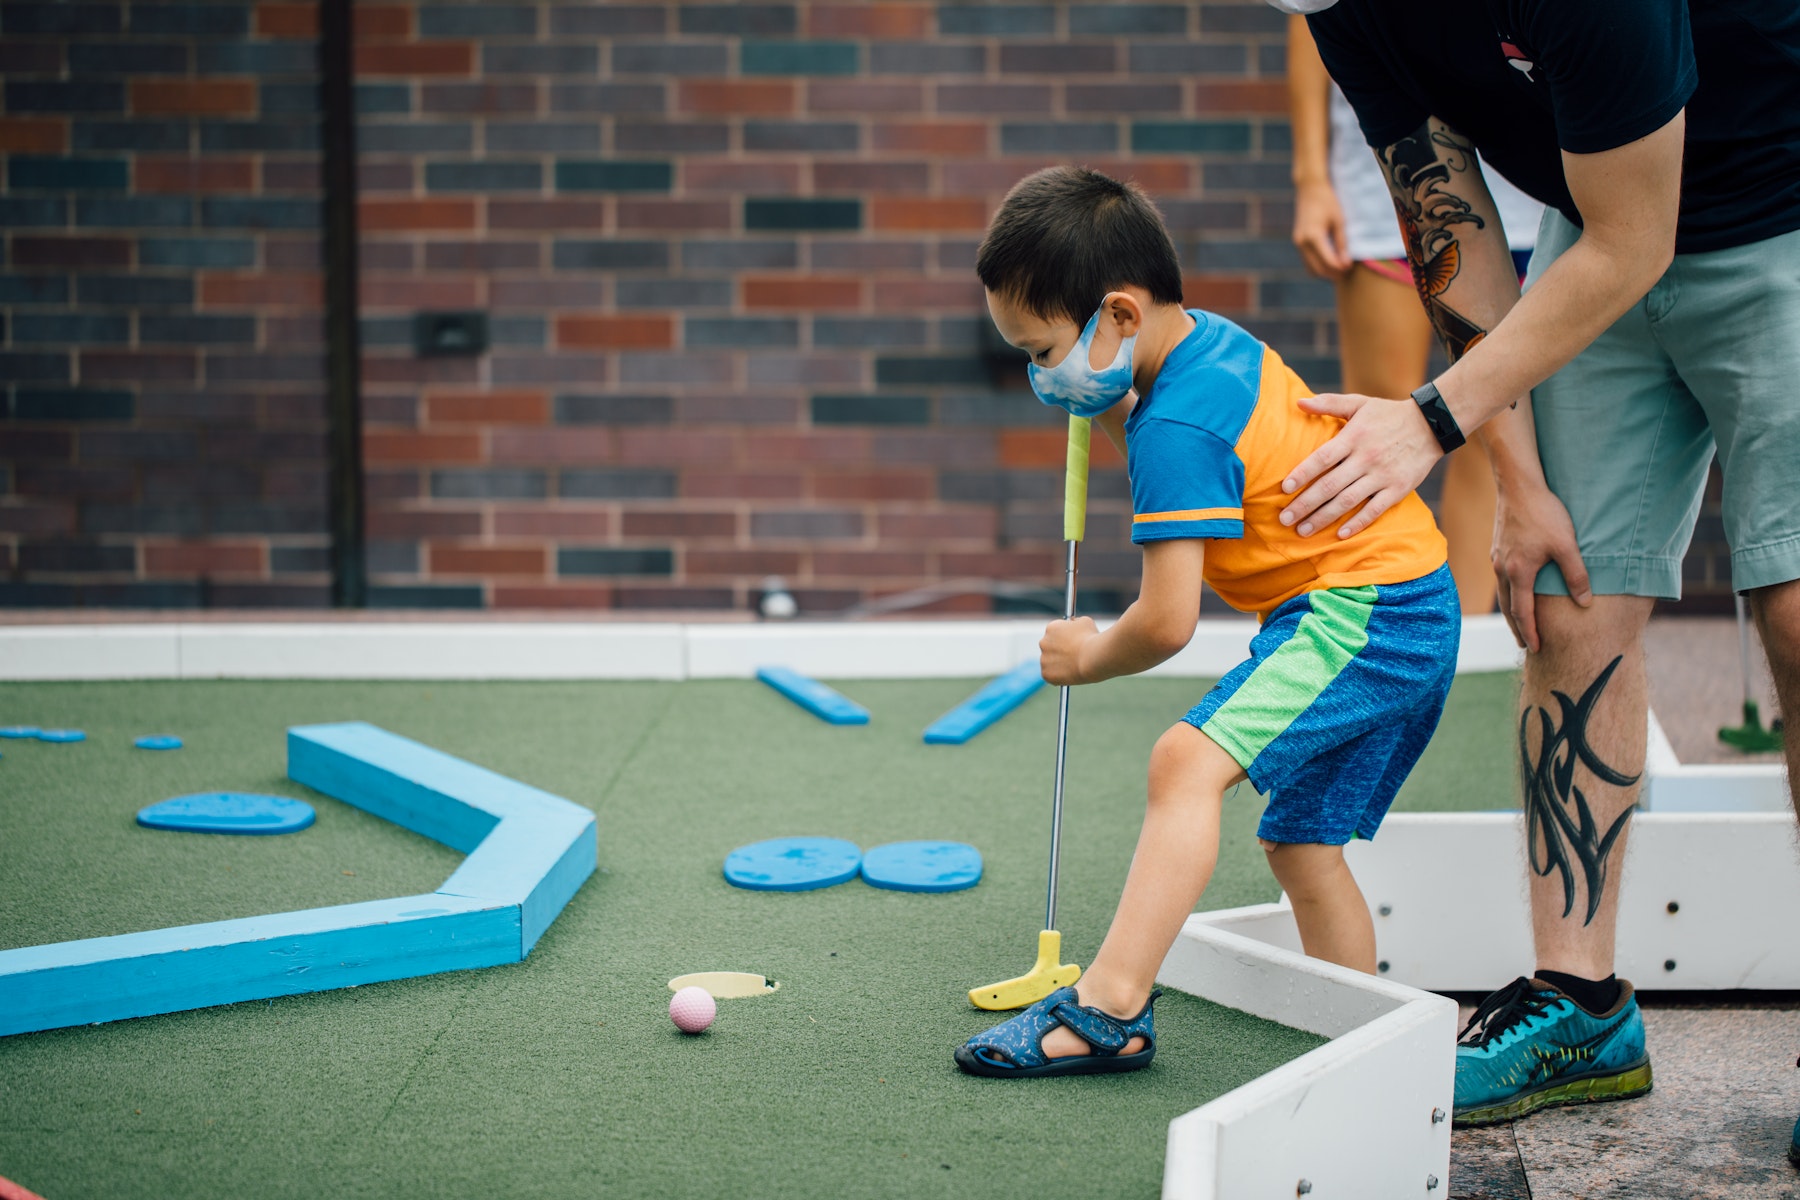 A young boy plays Skyline Mini Golf with the help of an adult.